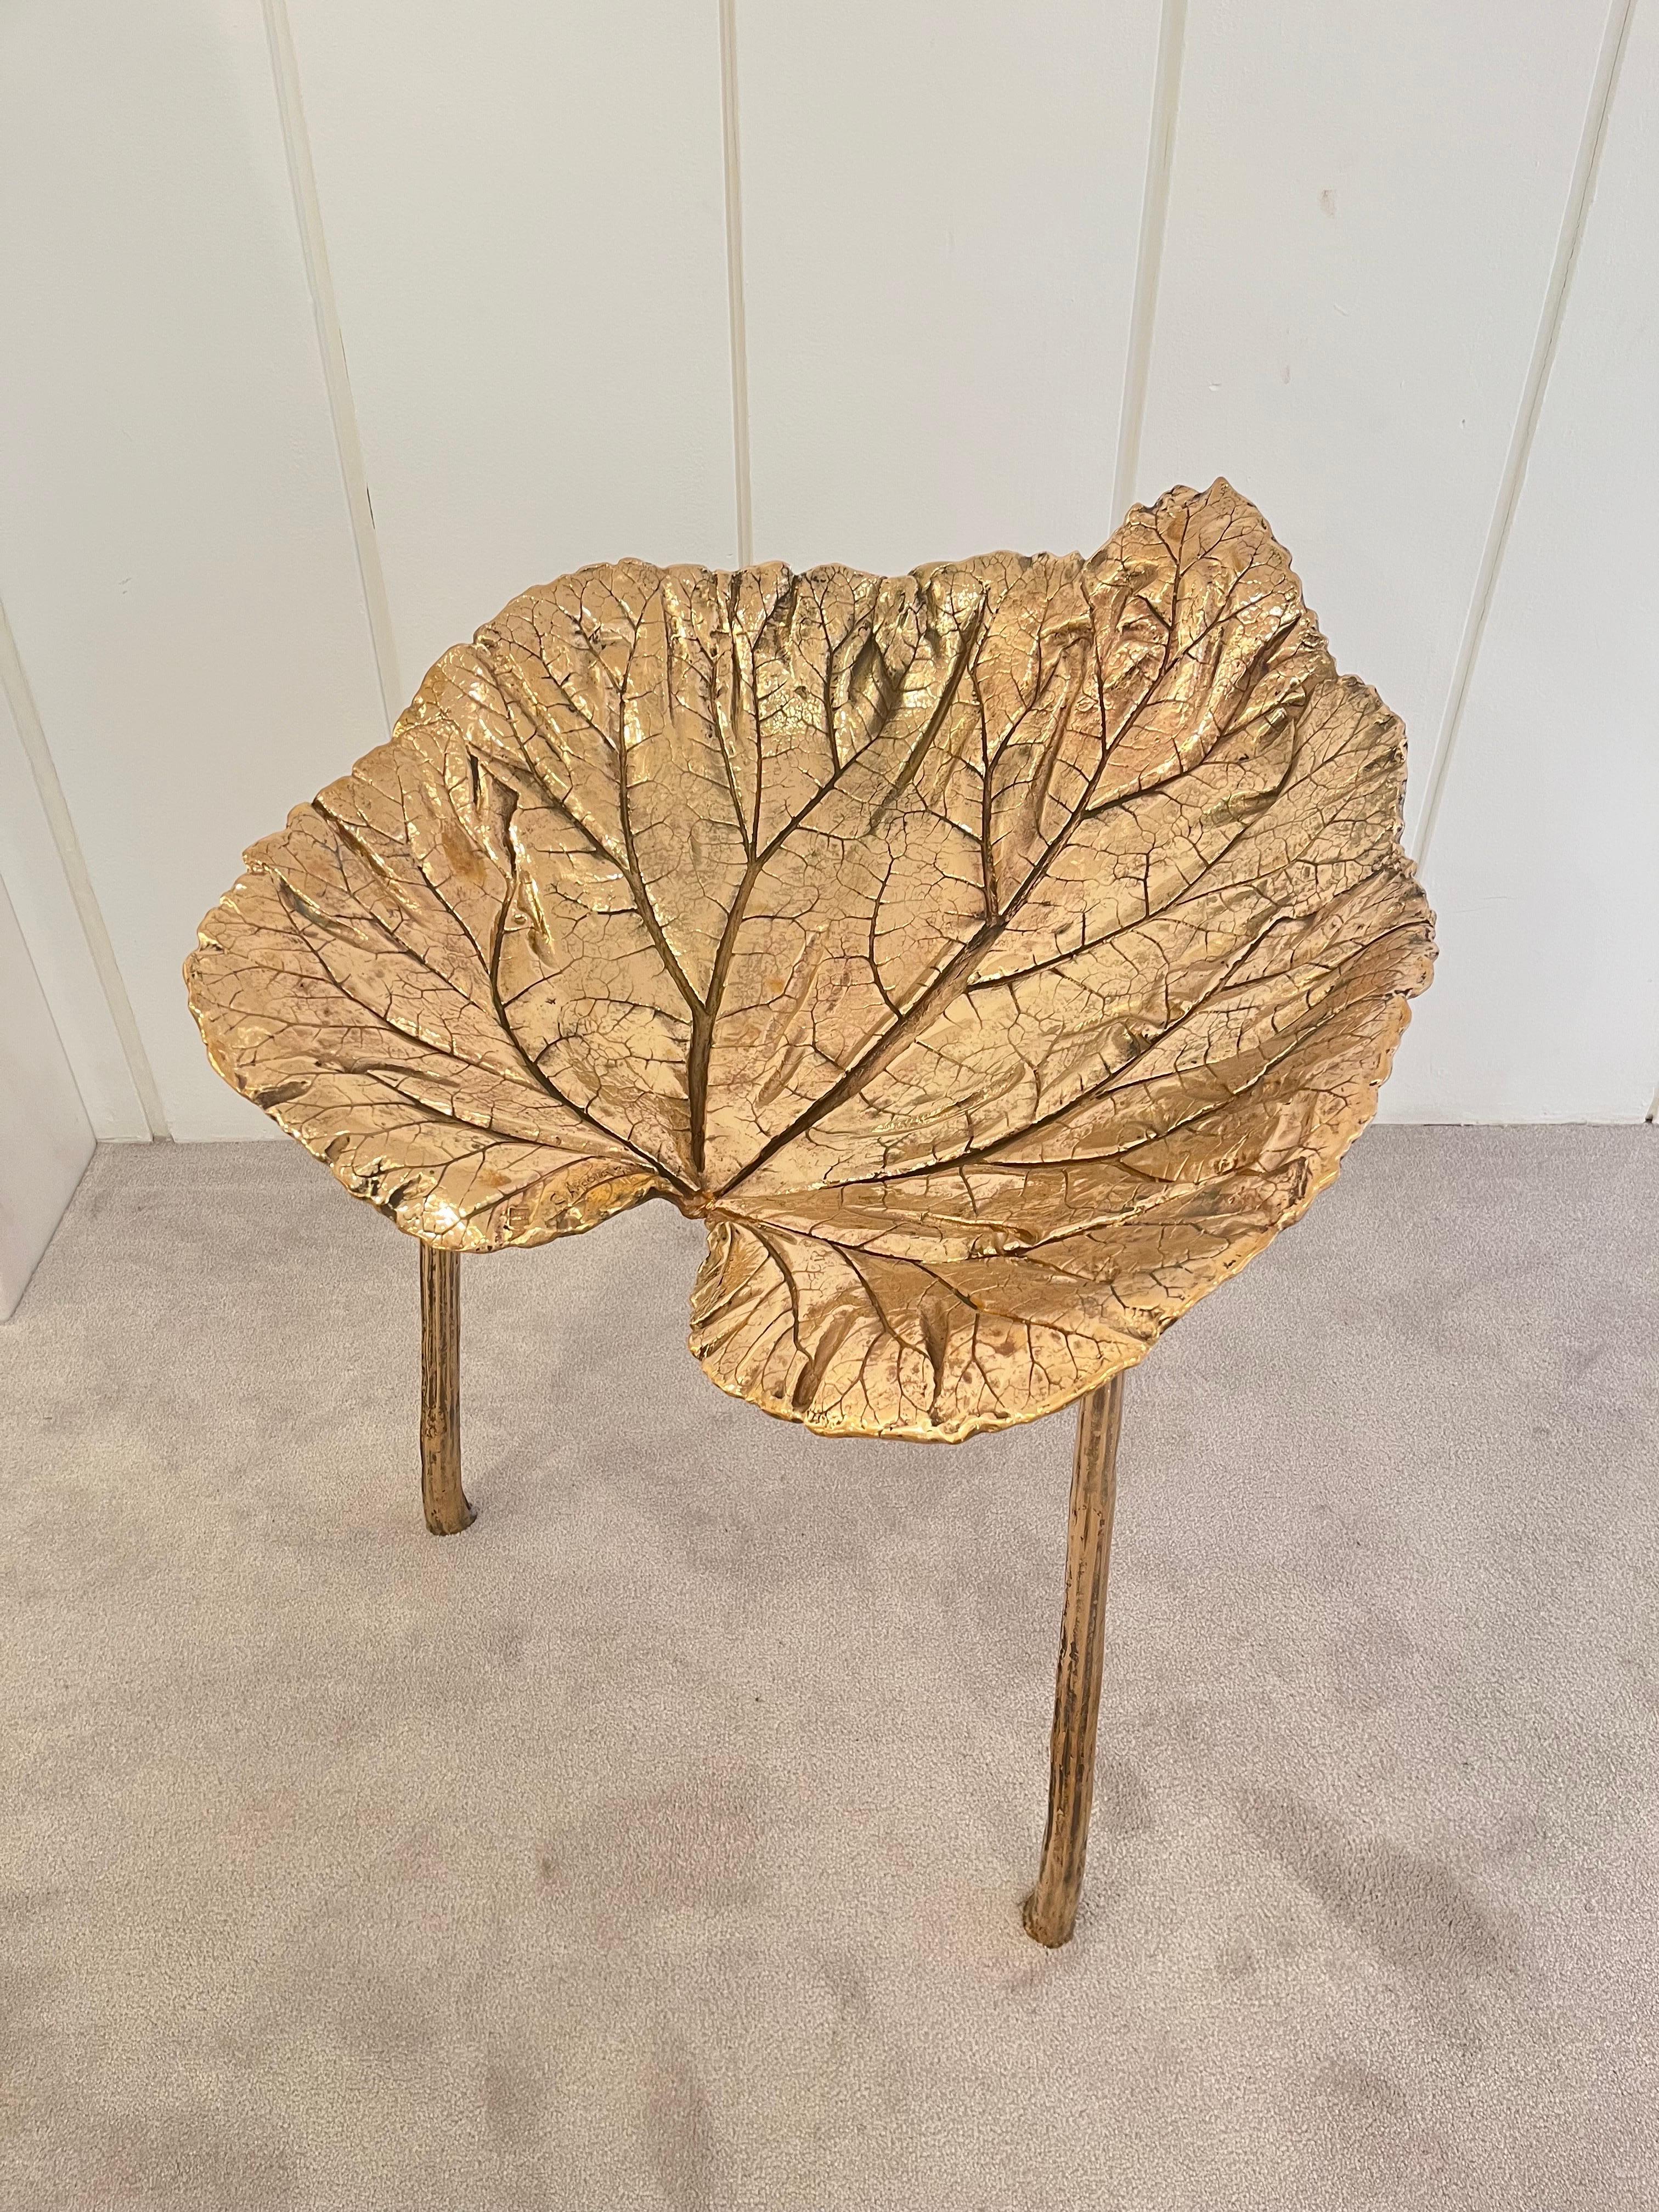 Large Folia stool by Clotilde Ancarani
Massif bronze 
Signeg by the artist and stampend with foundery
edition 1/8.